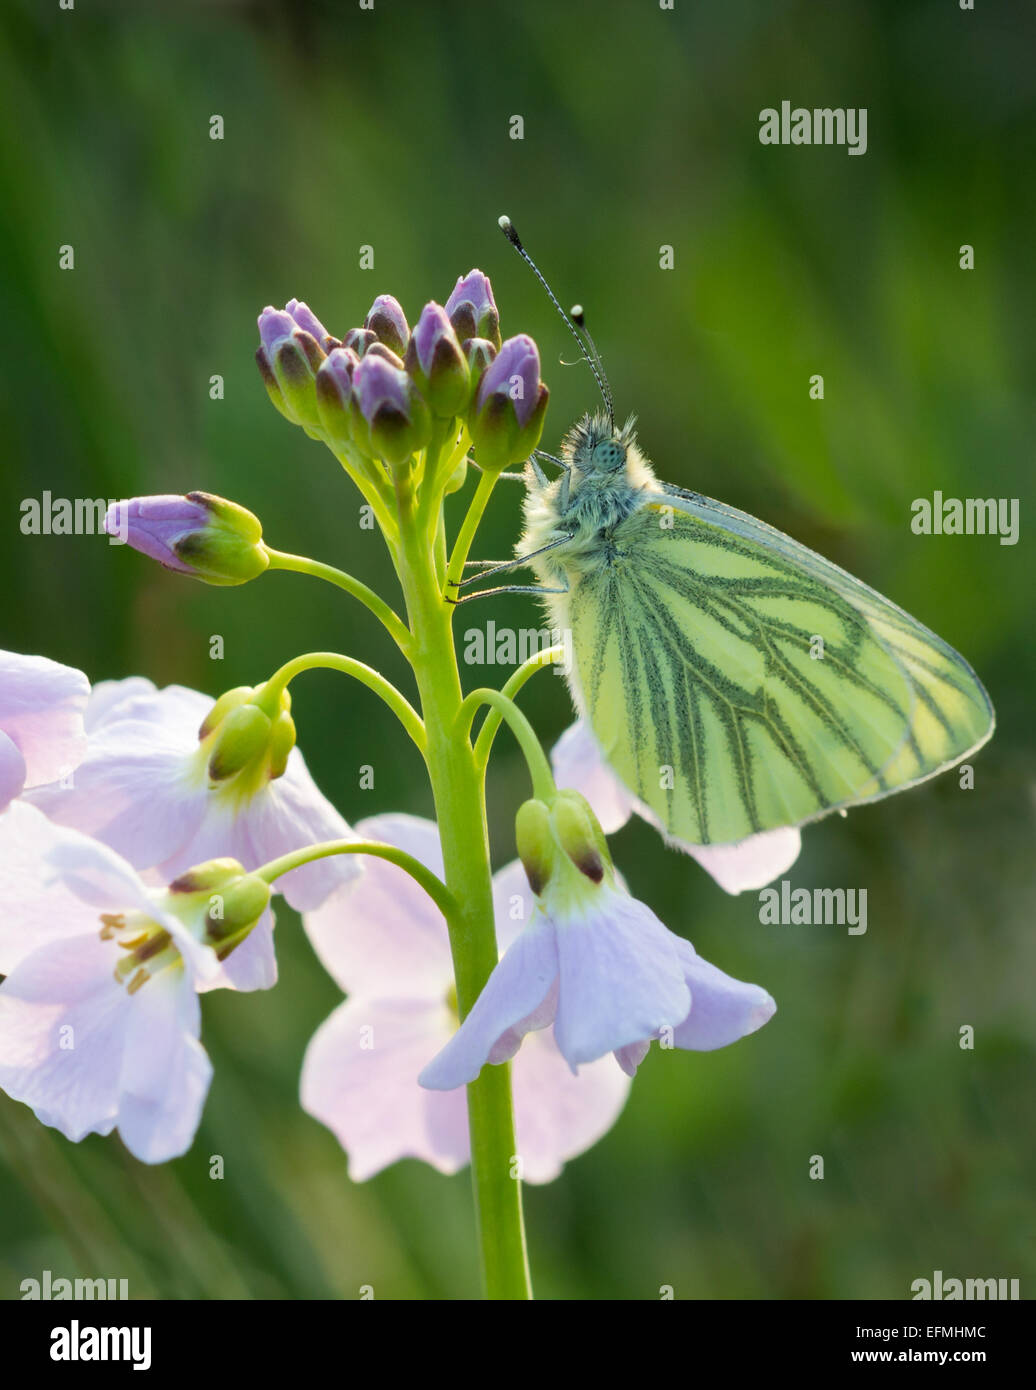 Green Veined White Butterfly on Ladysmock Stock Photo